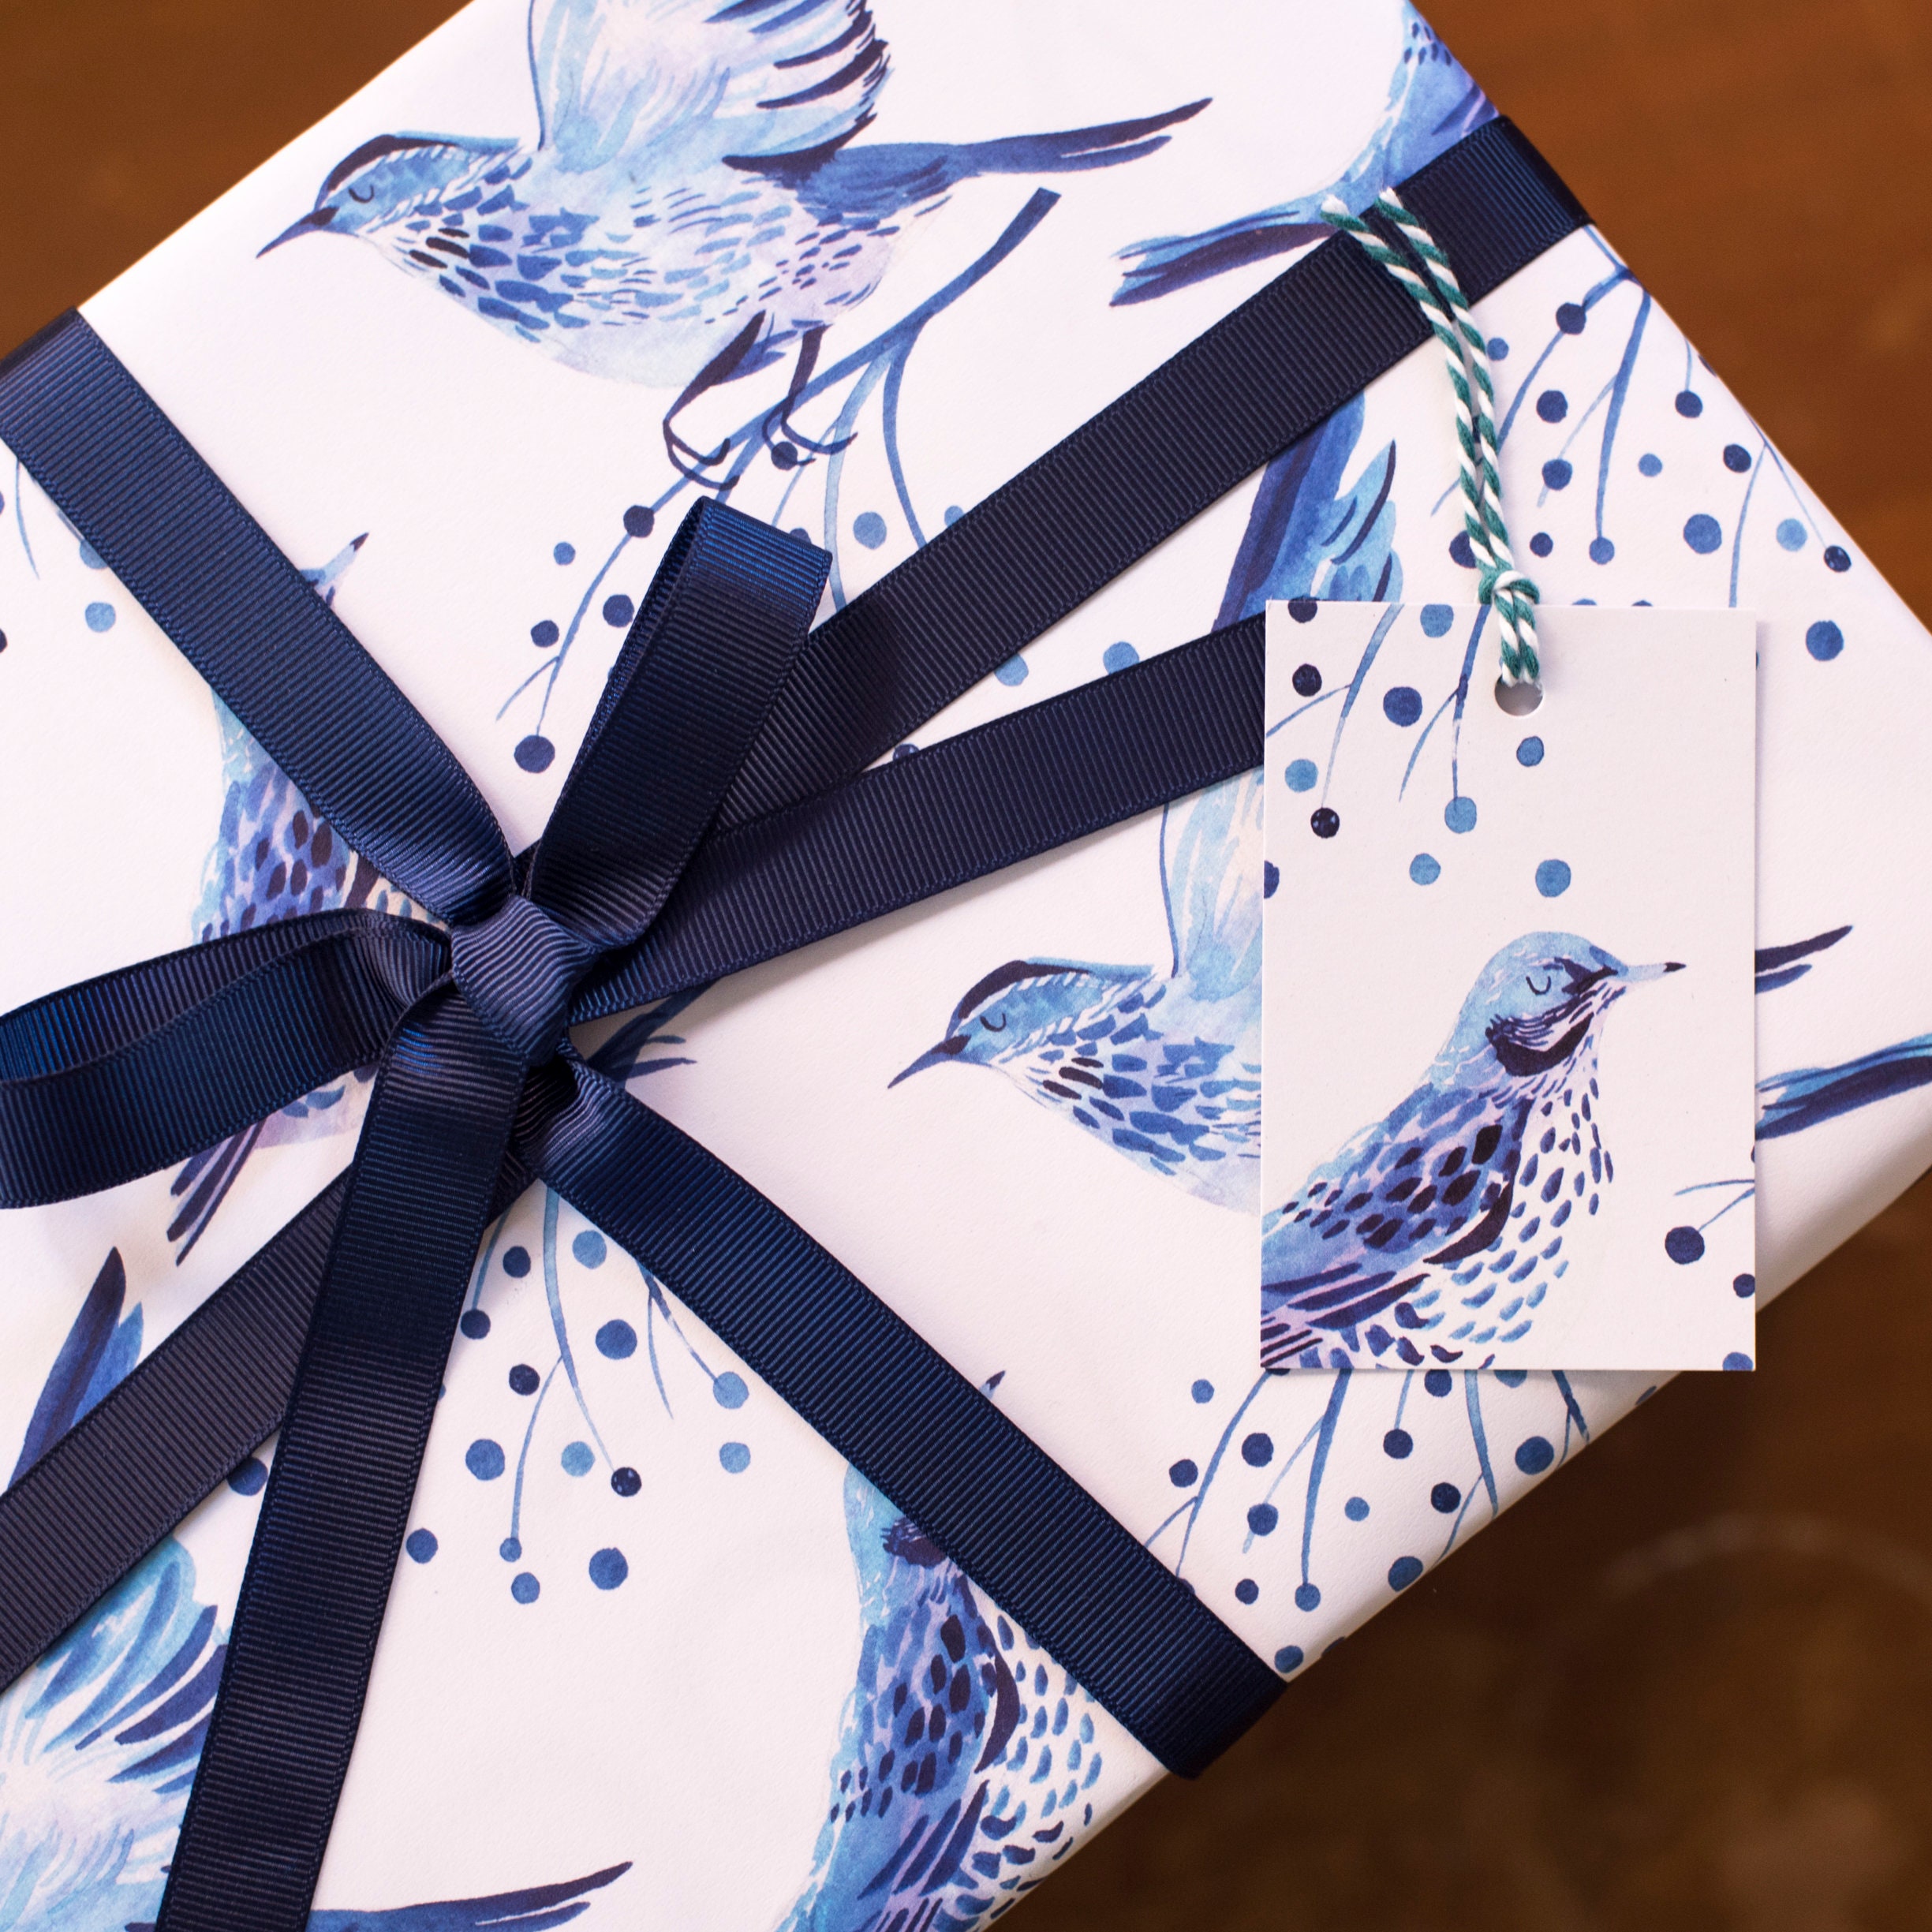 Christmas Geese luxury recycled wrapping paper | Kate Slater